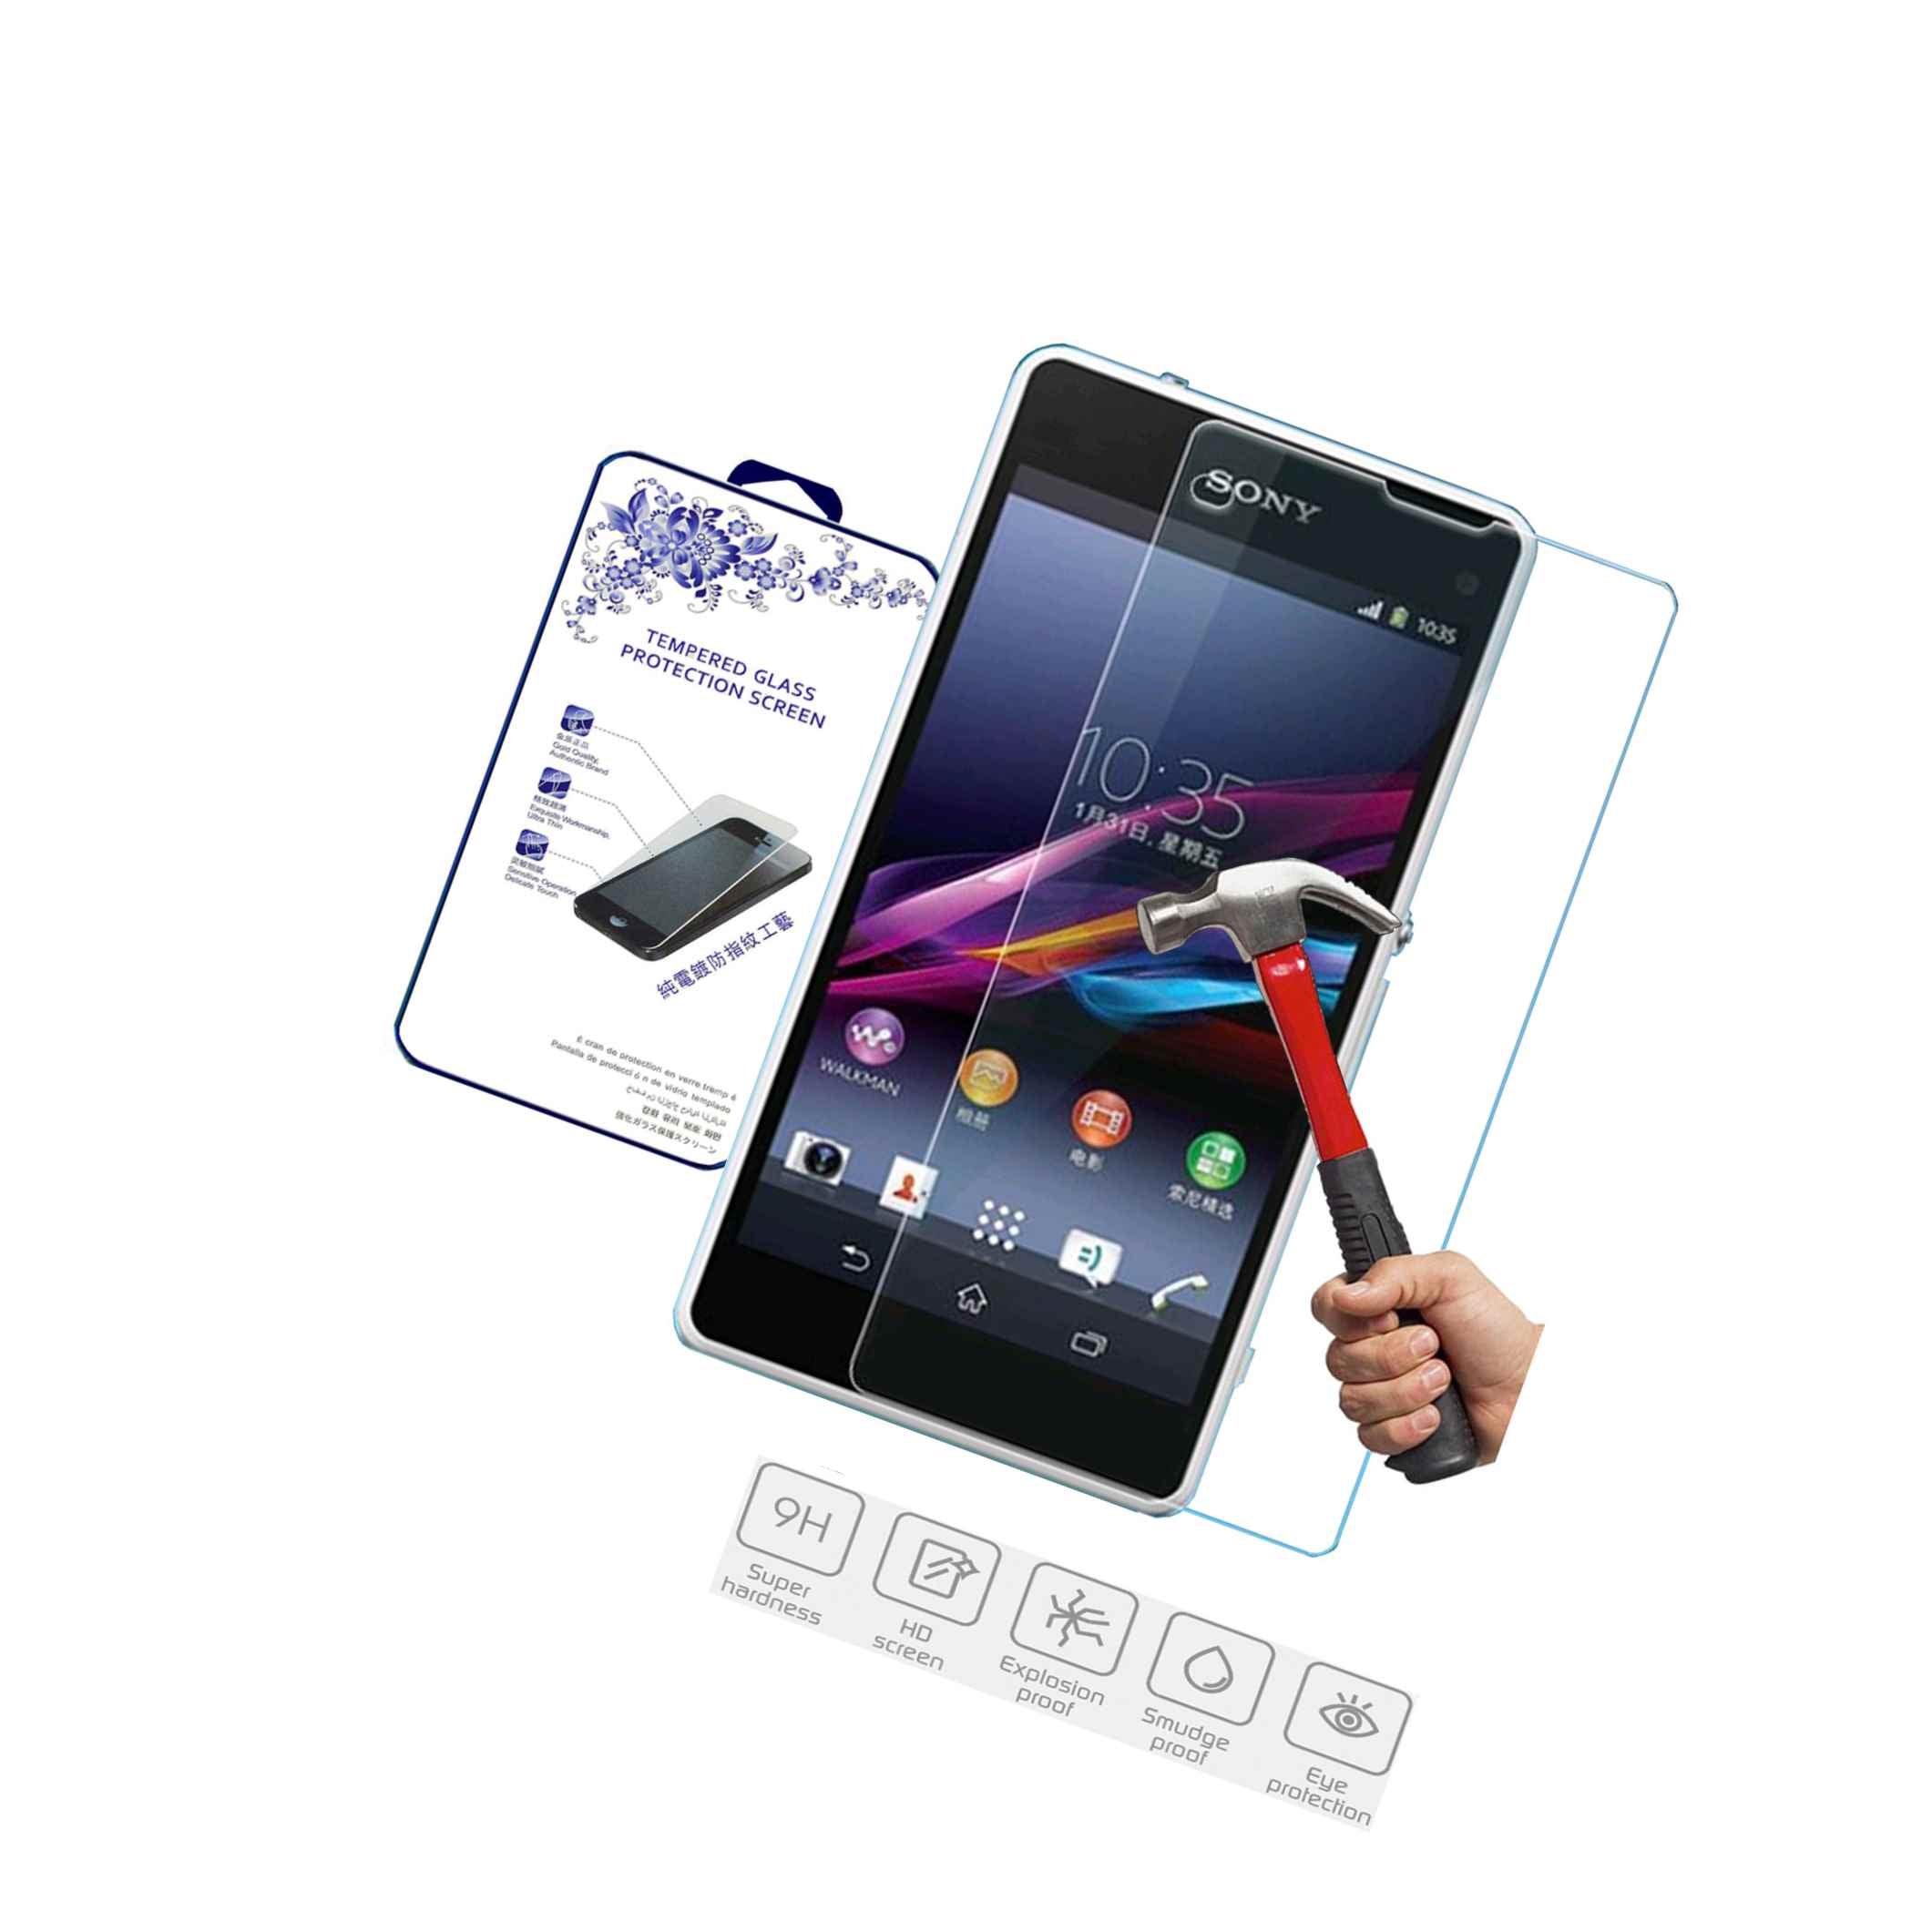 heilig melk wedstrijd For Sony Xperia Z1 Compact / Z1 Mini HD Premium Tempered Glass Screen –  Globaleparts